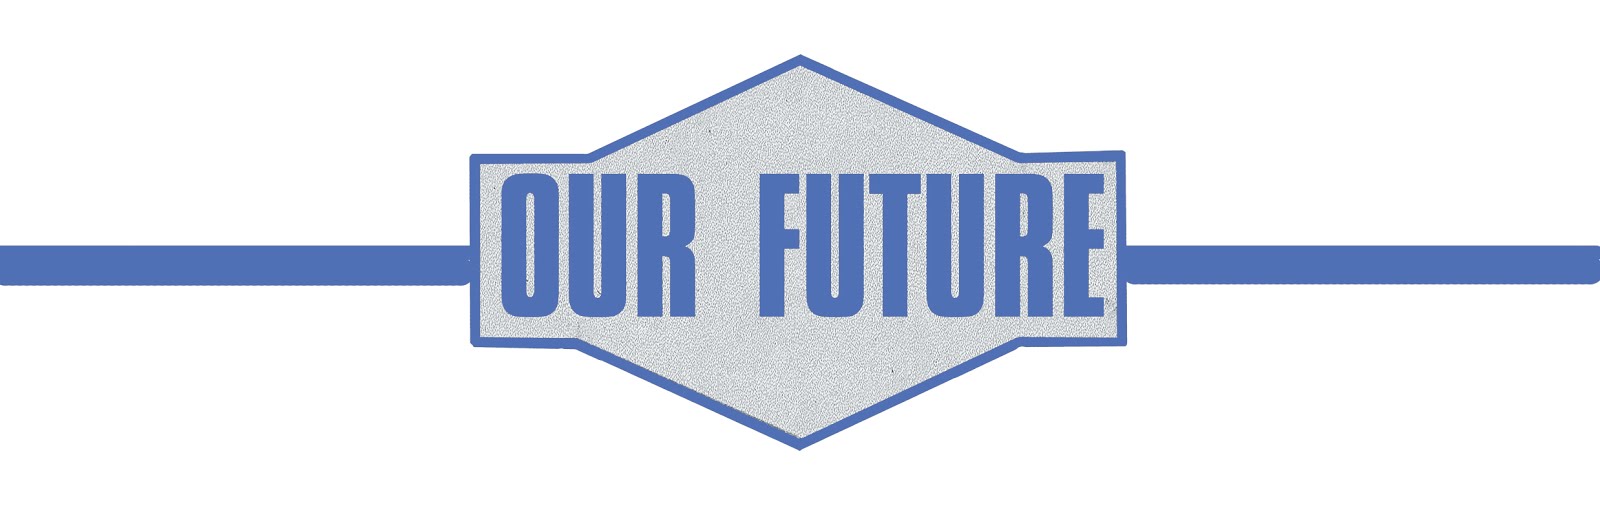 Our Future Records and Zine